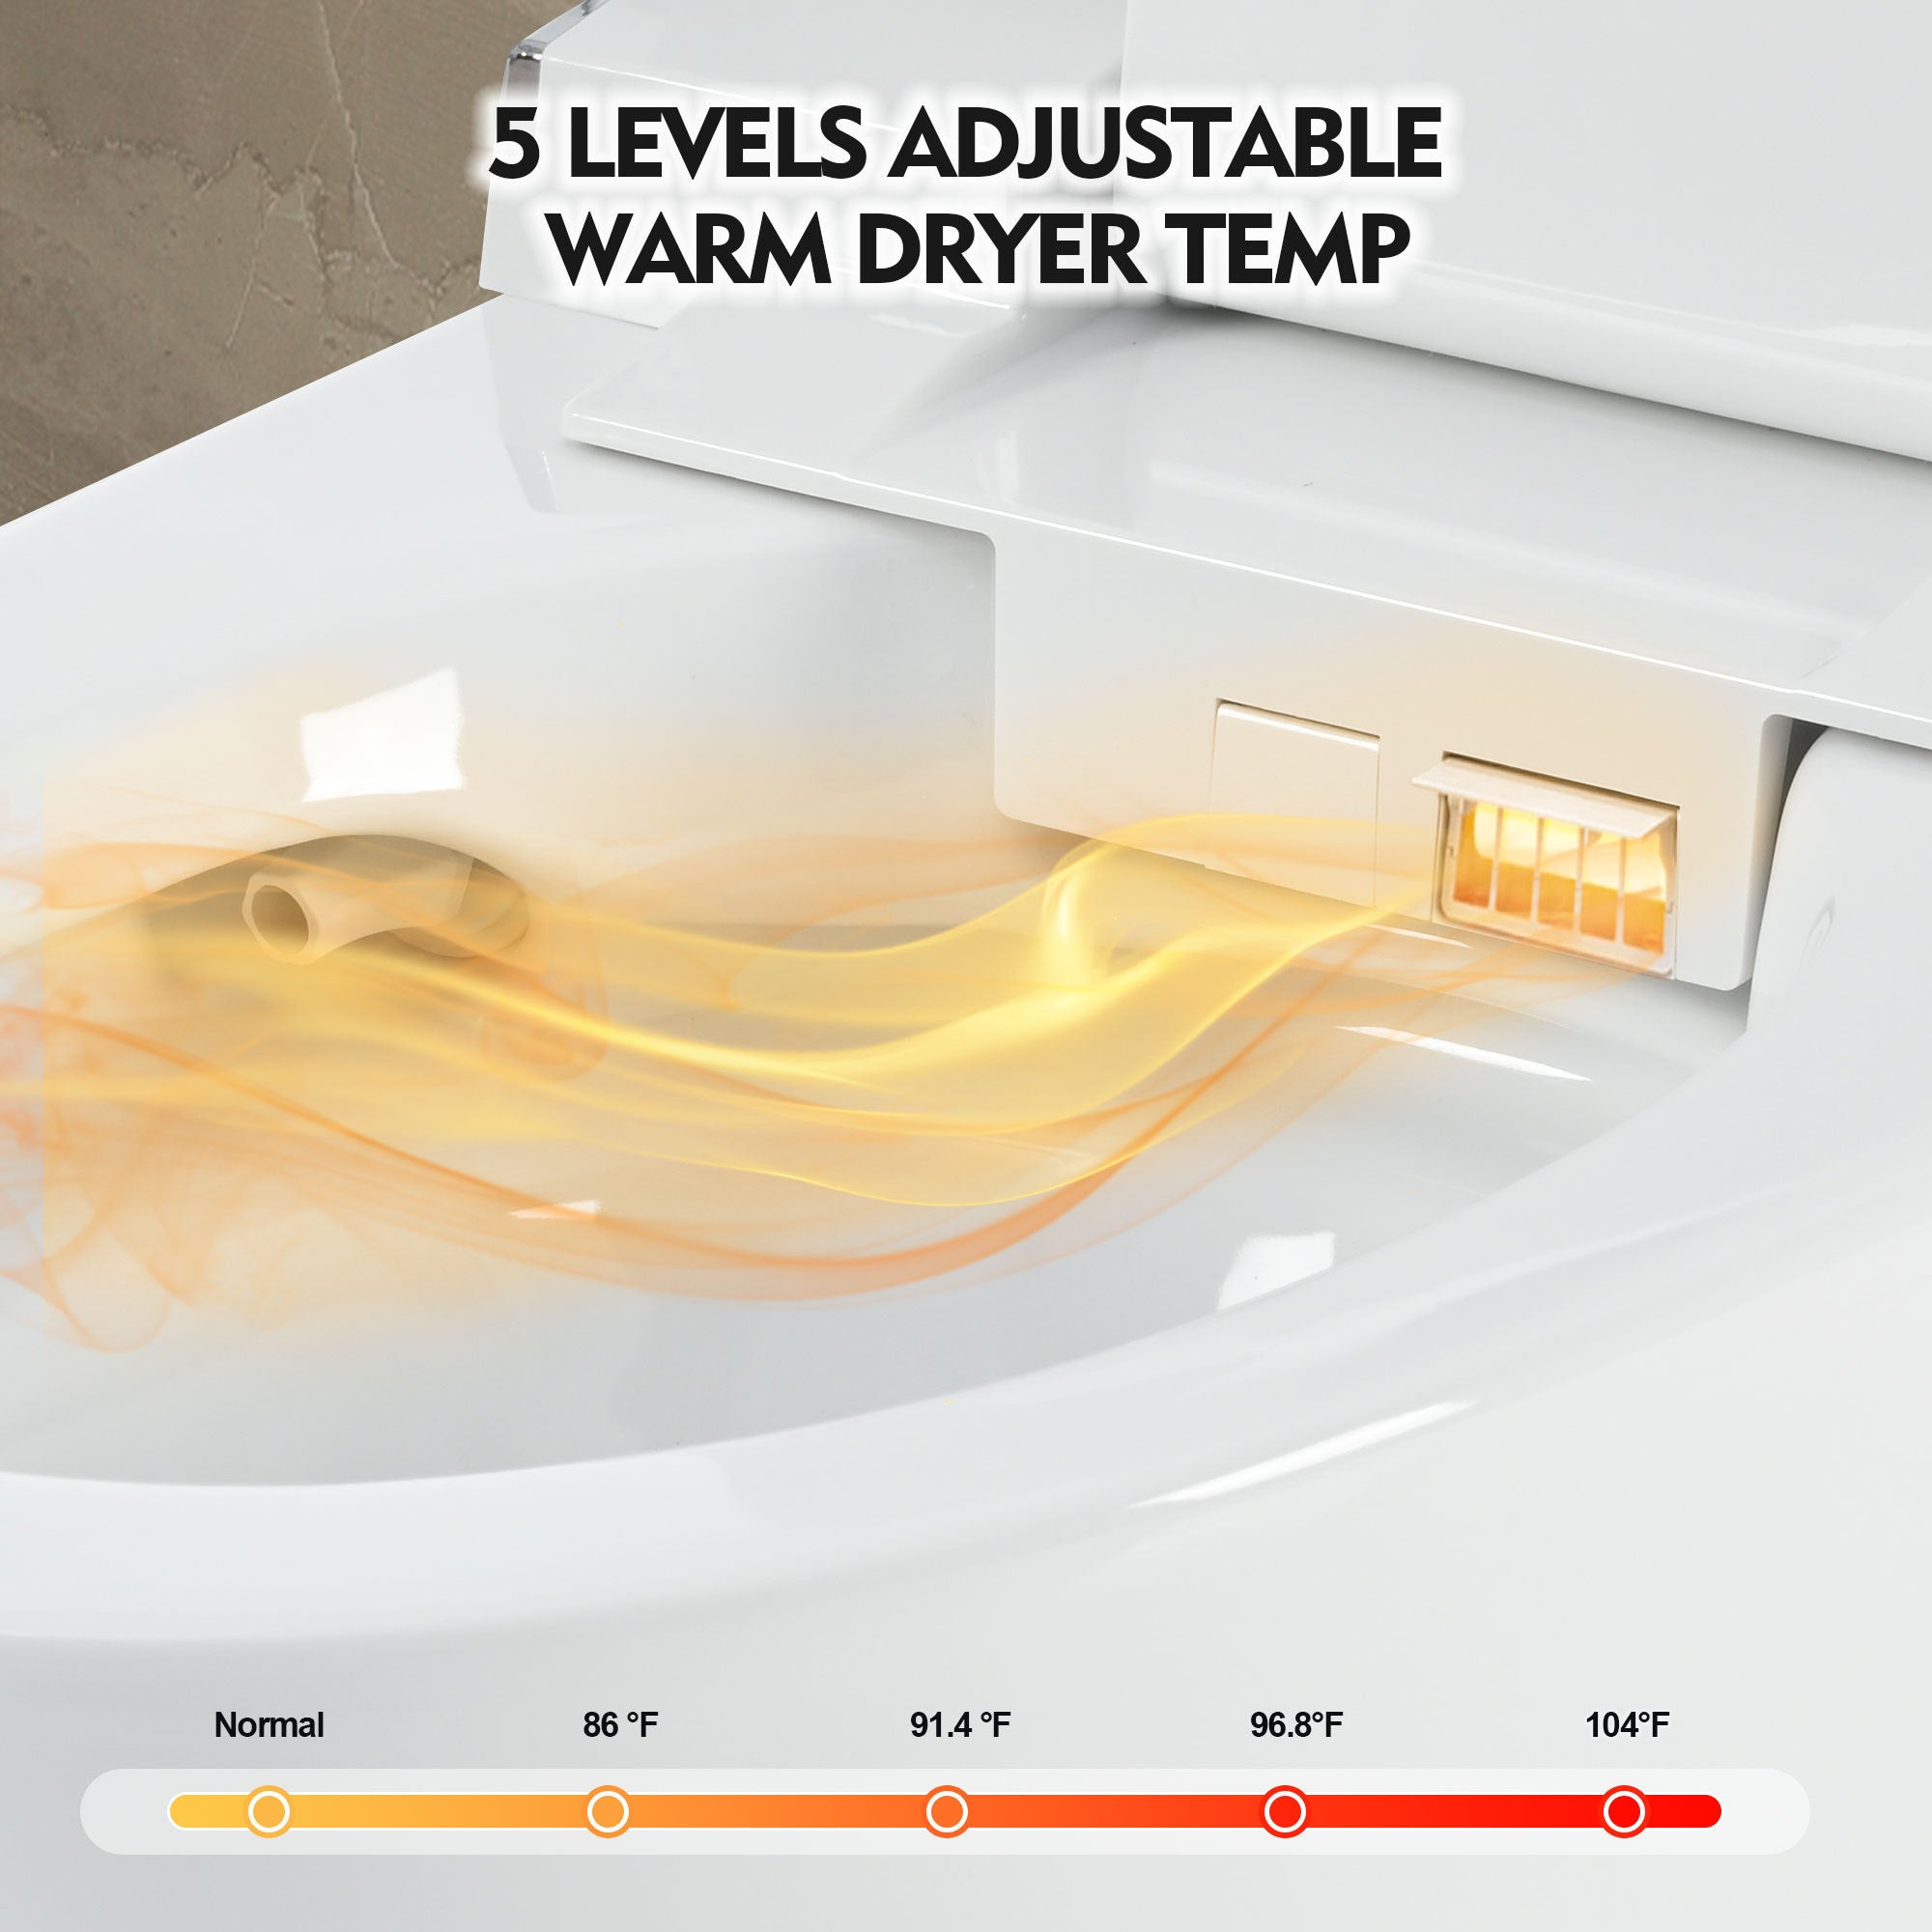 Luxury Smart Toilet with Dryer and warm water,  Elongated Bidet Toilet with Heated Seat, with Remote Control